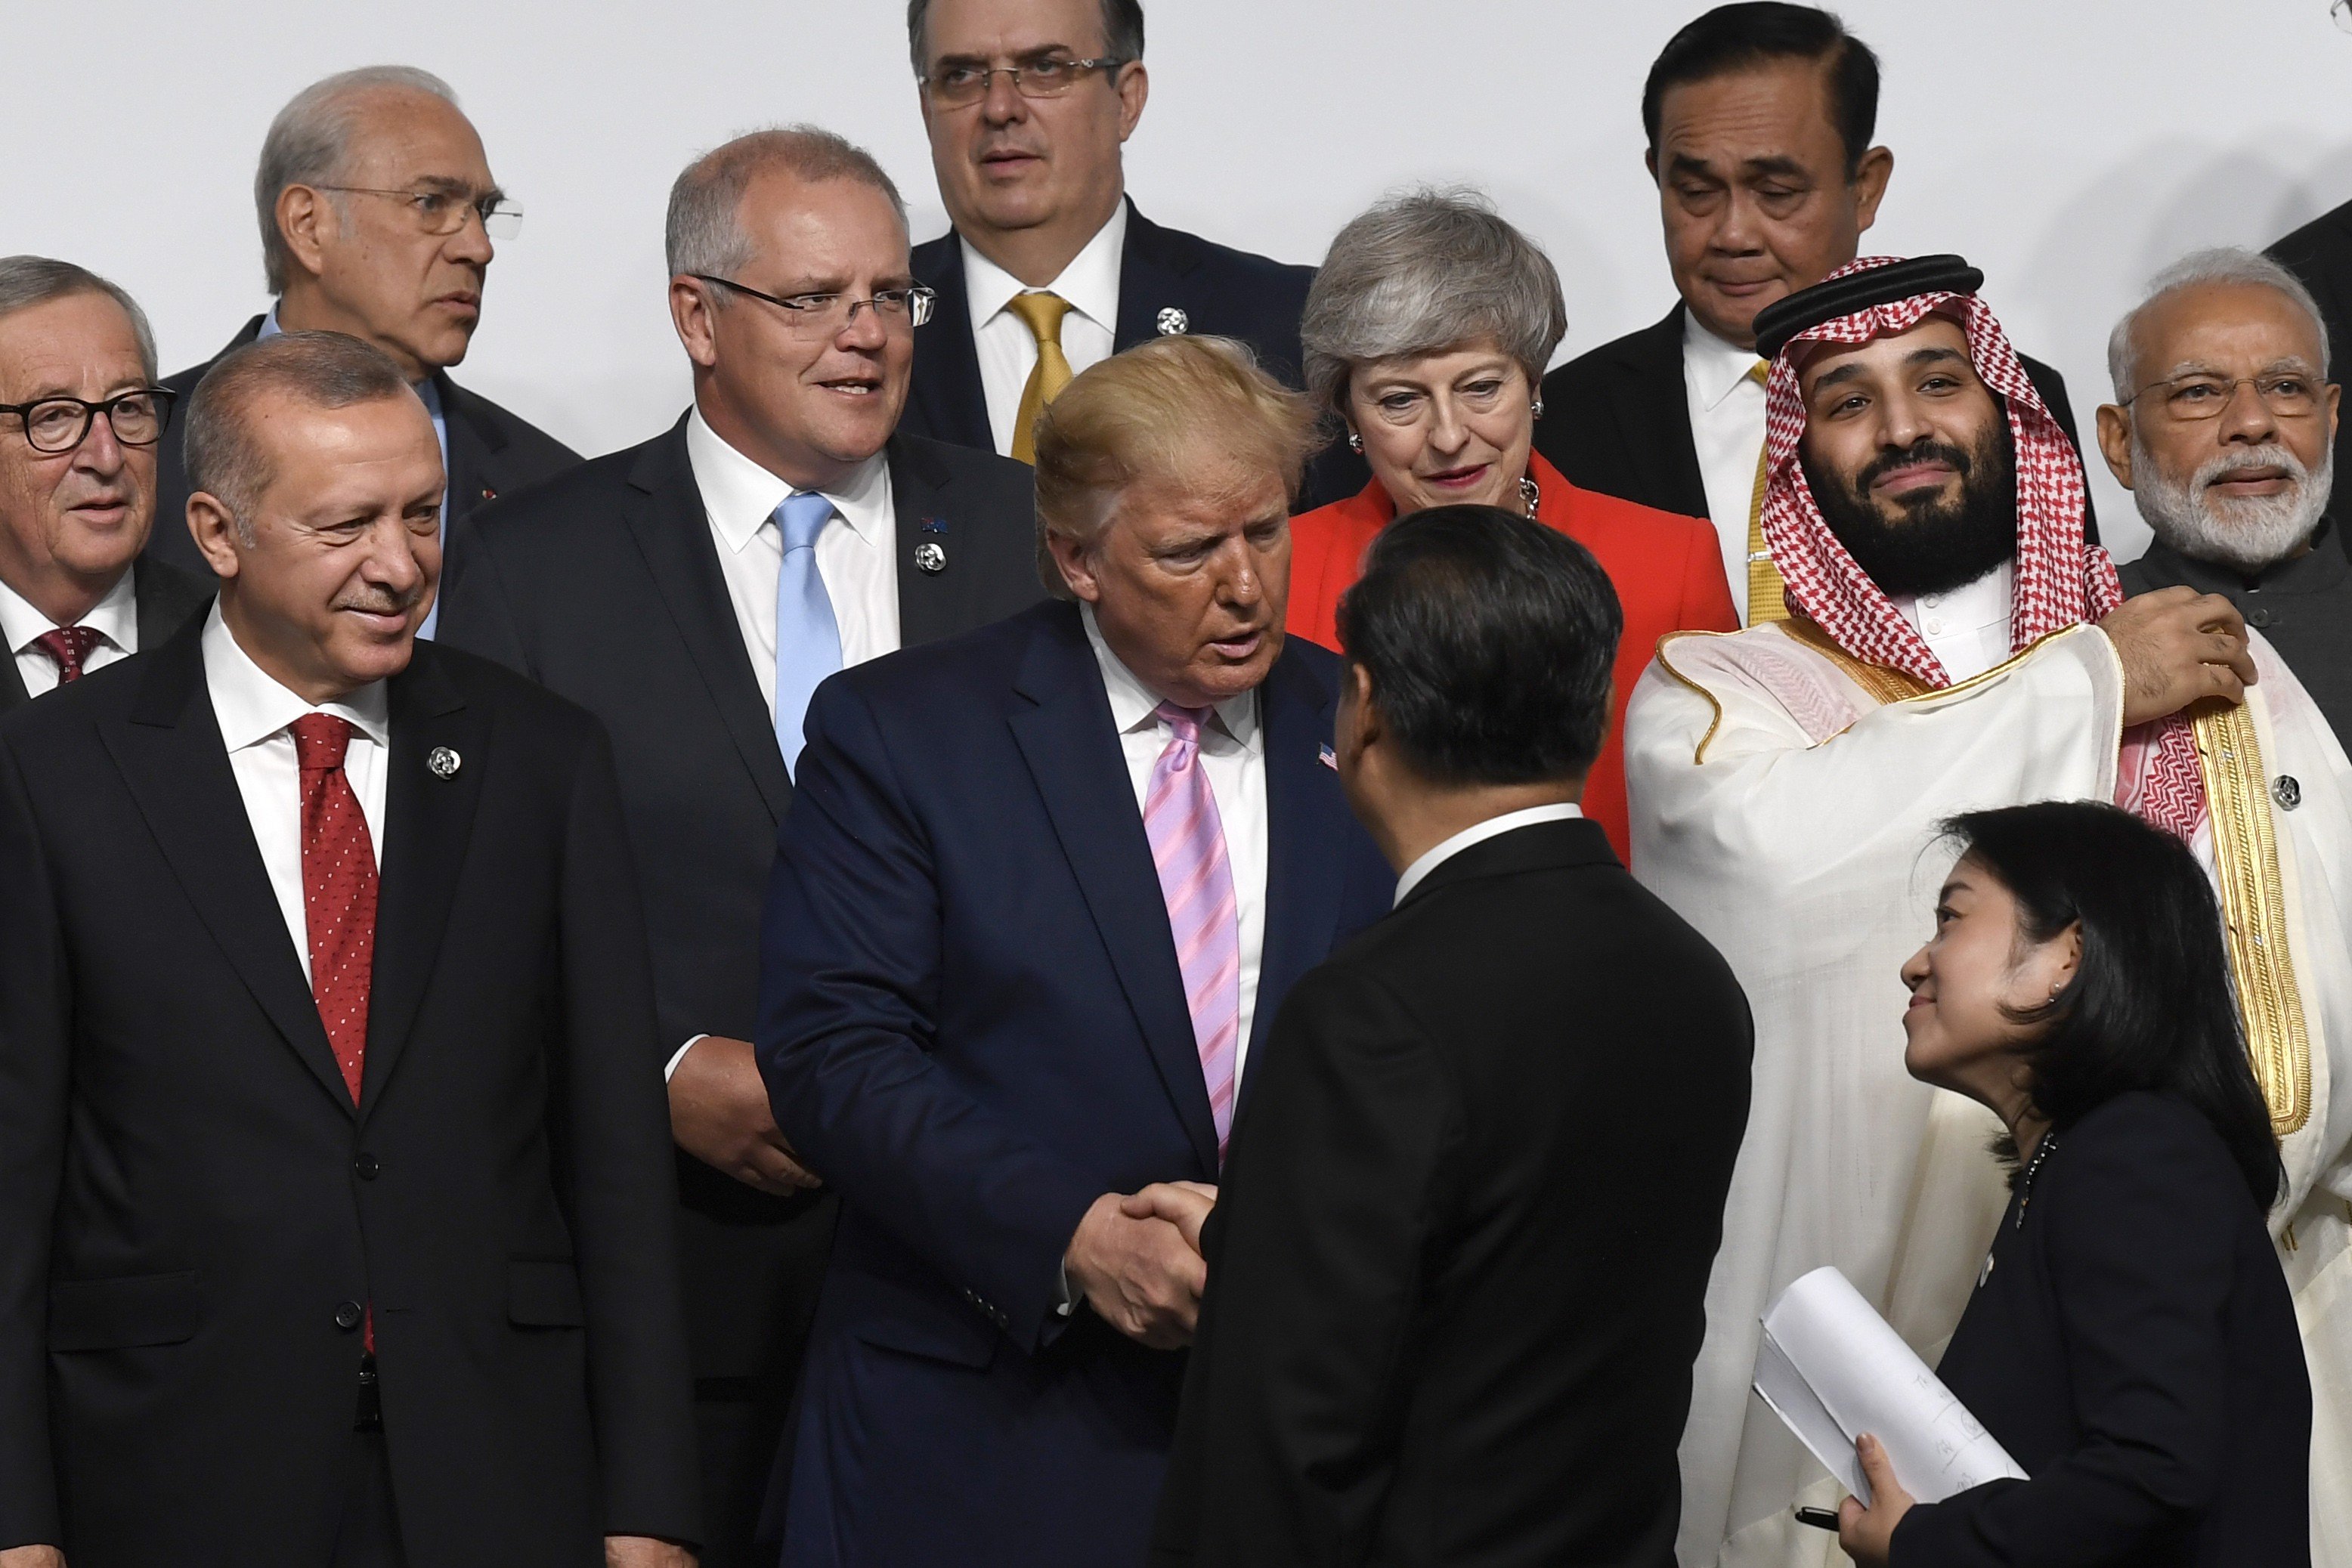 Beneath The Smiles And Handshakes Tensions Simmer As World